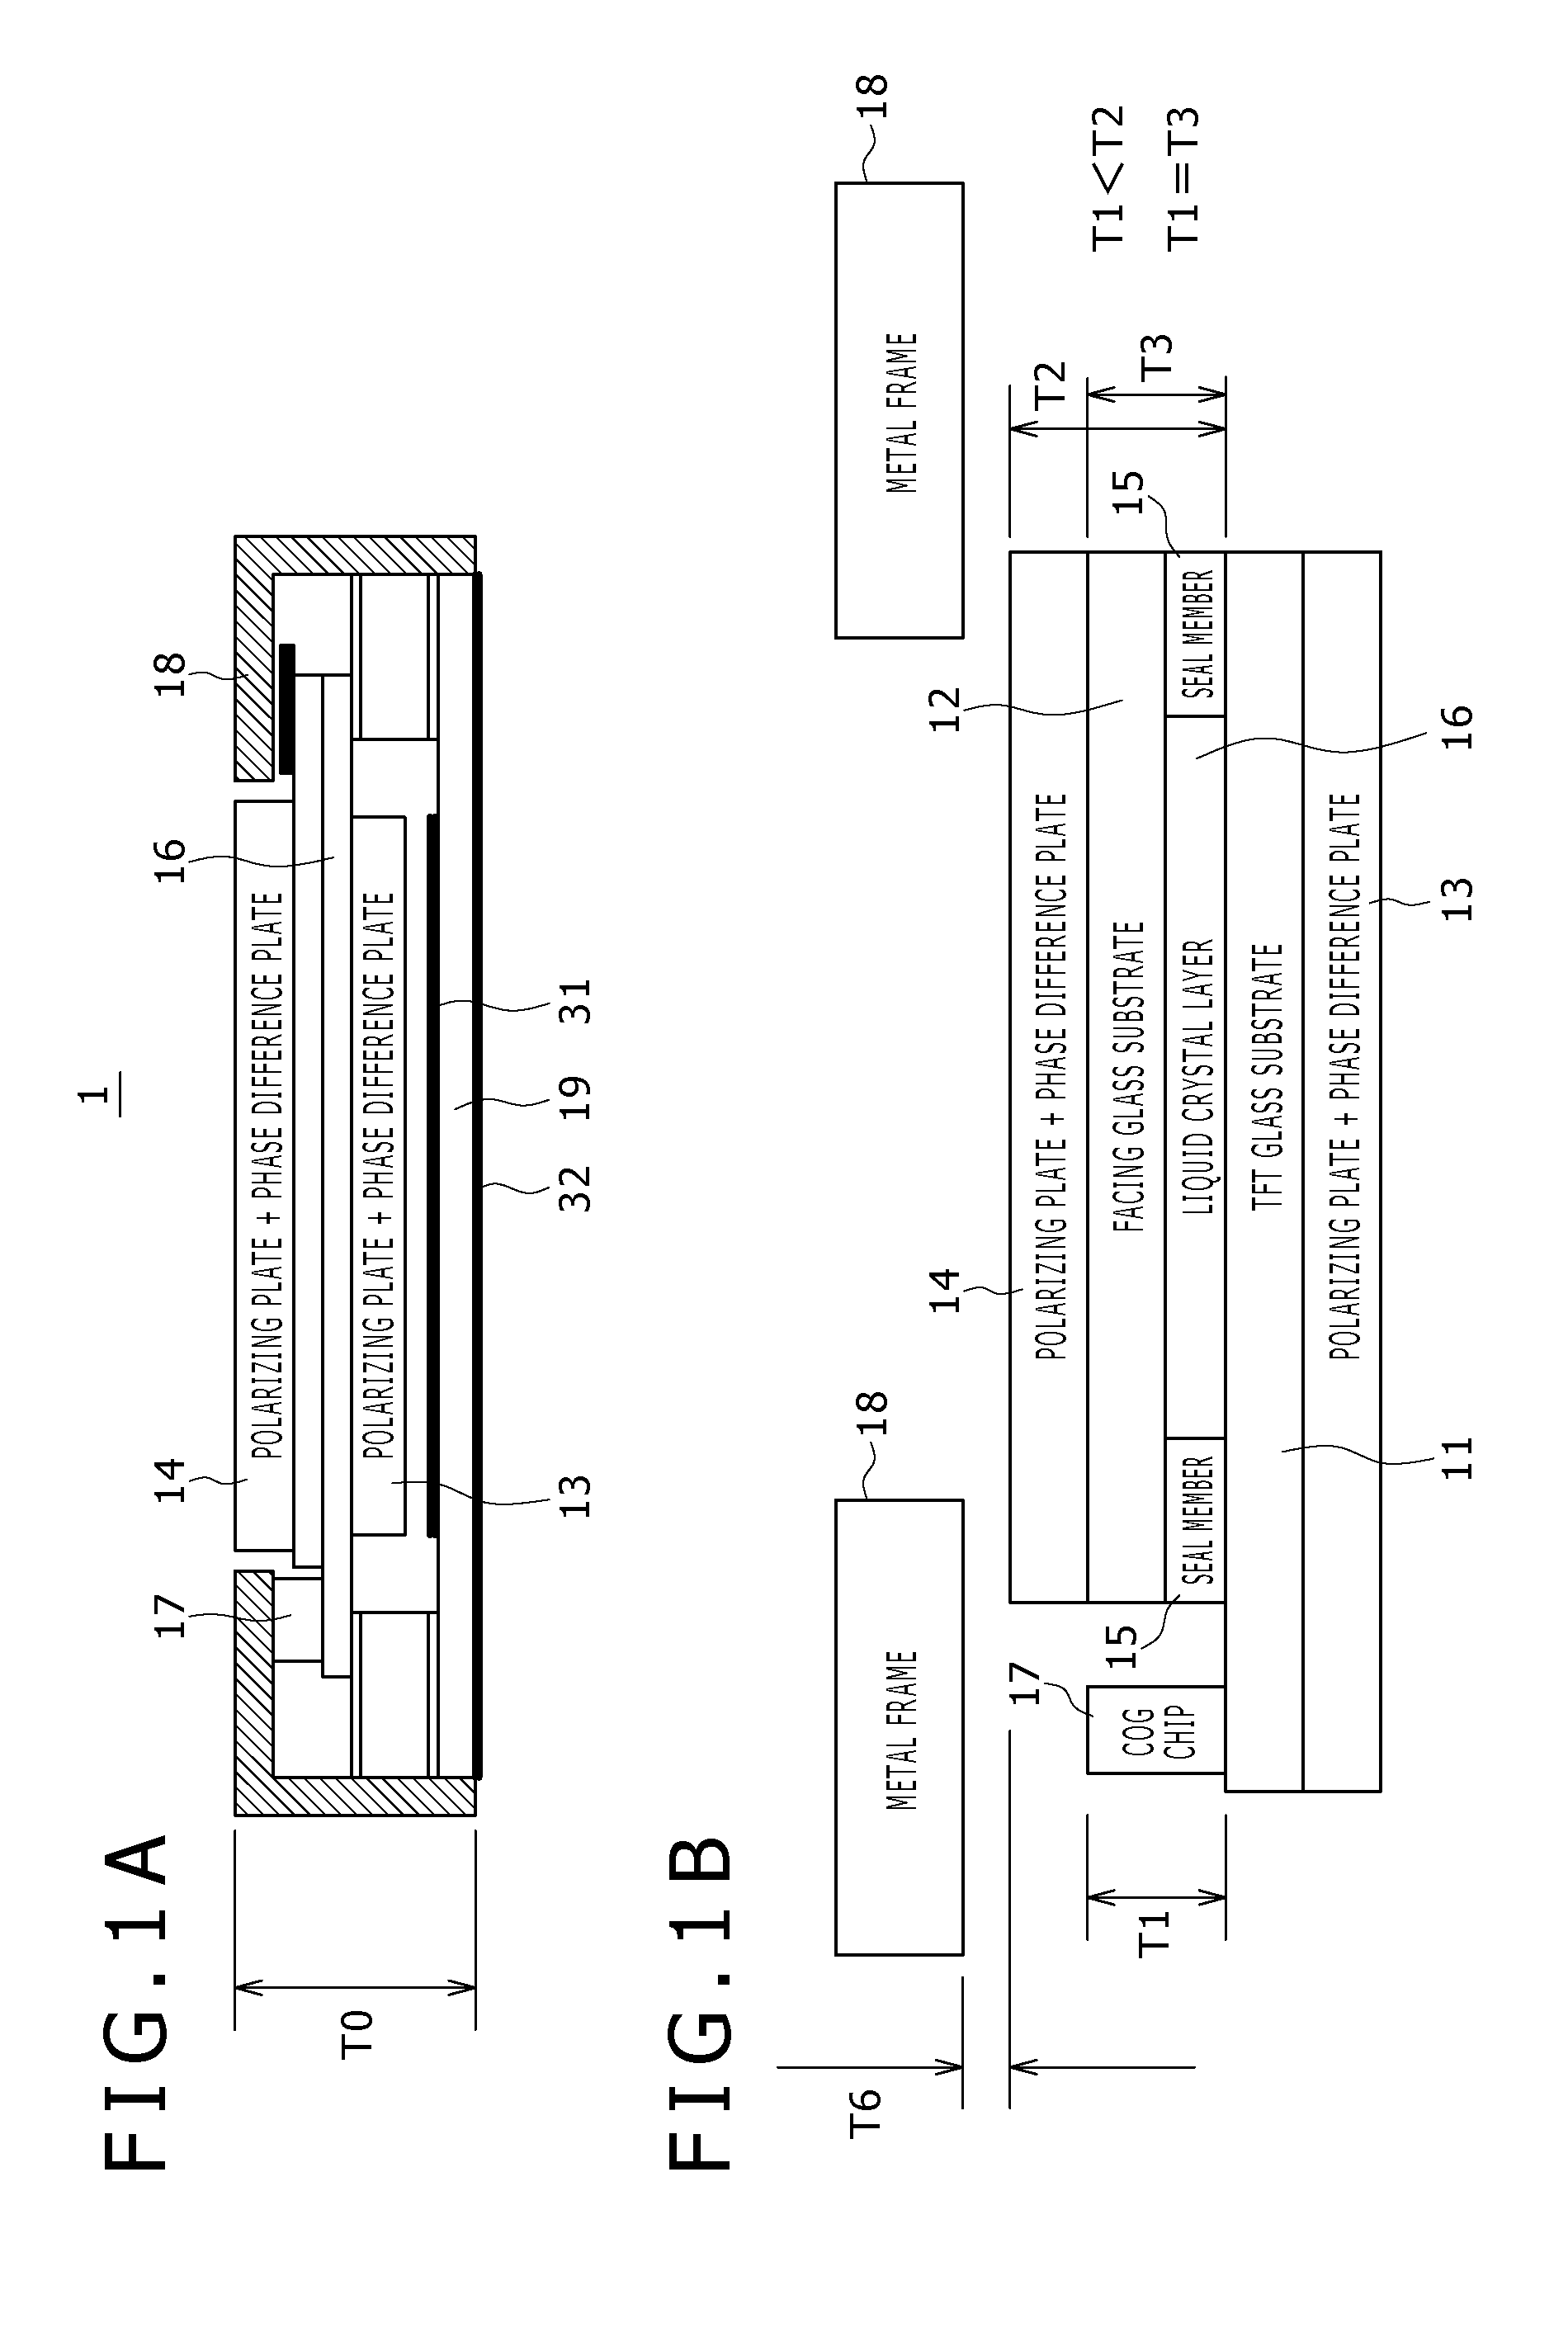 Display device, method of manufacturing display device, and electronic apparatus